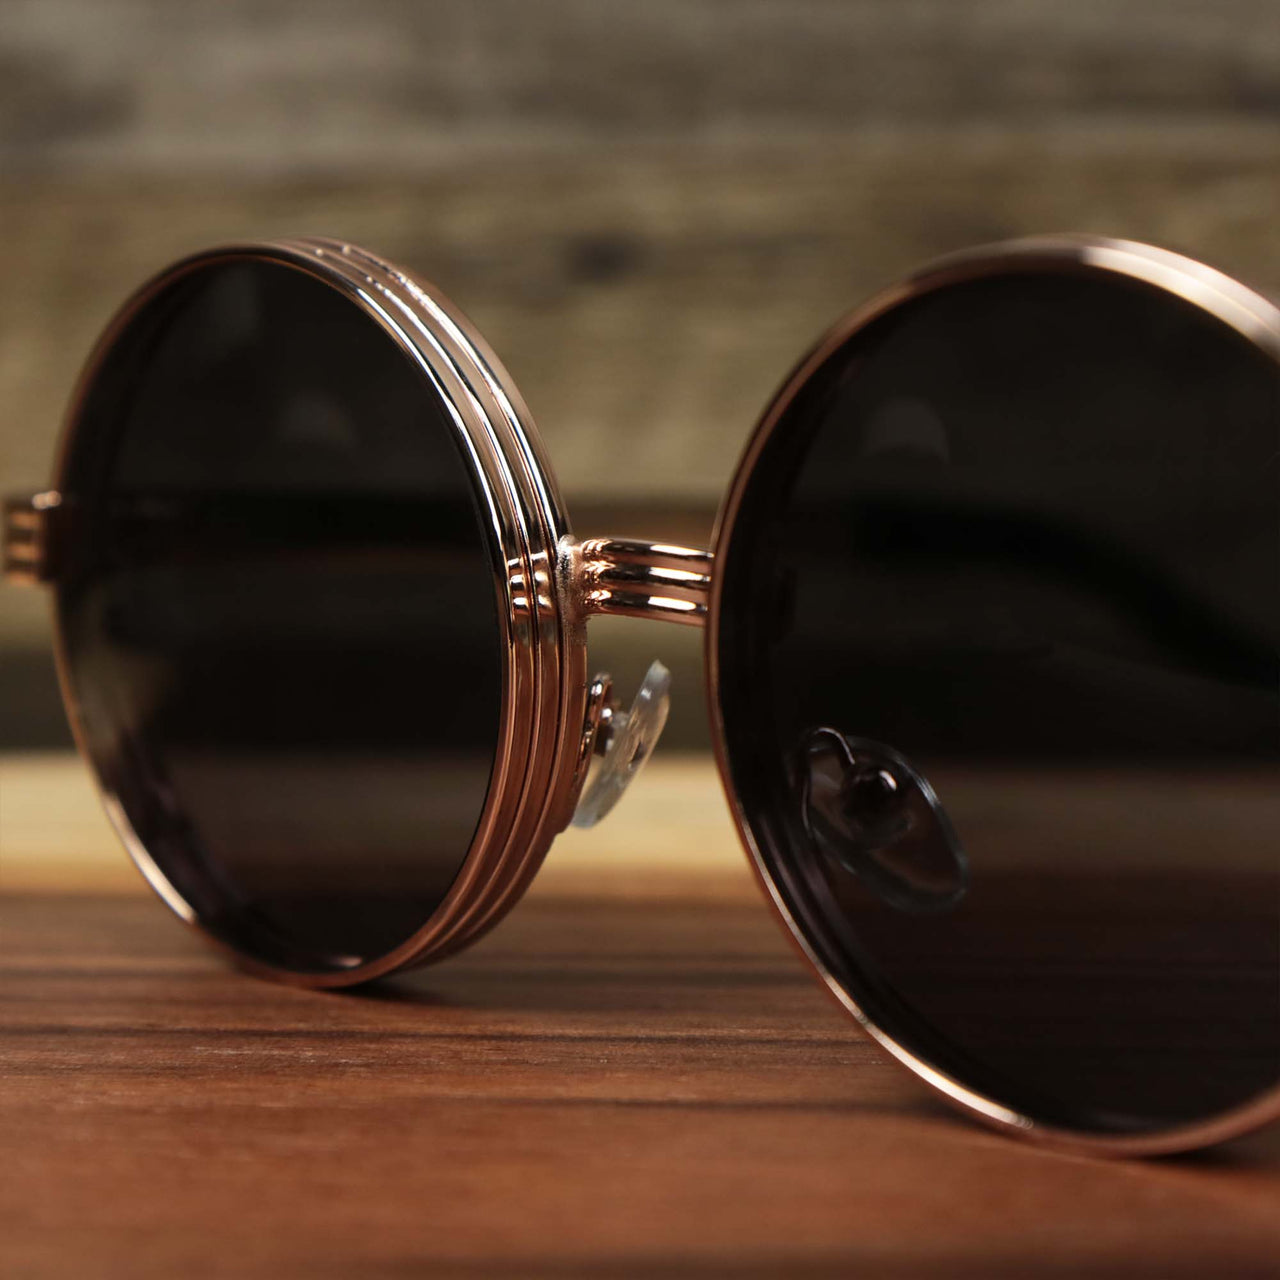 The bridge on the Round 3 Row Frame Black Lens Sunglasses with Rose Gold Frame